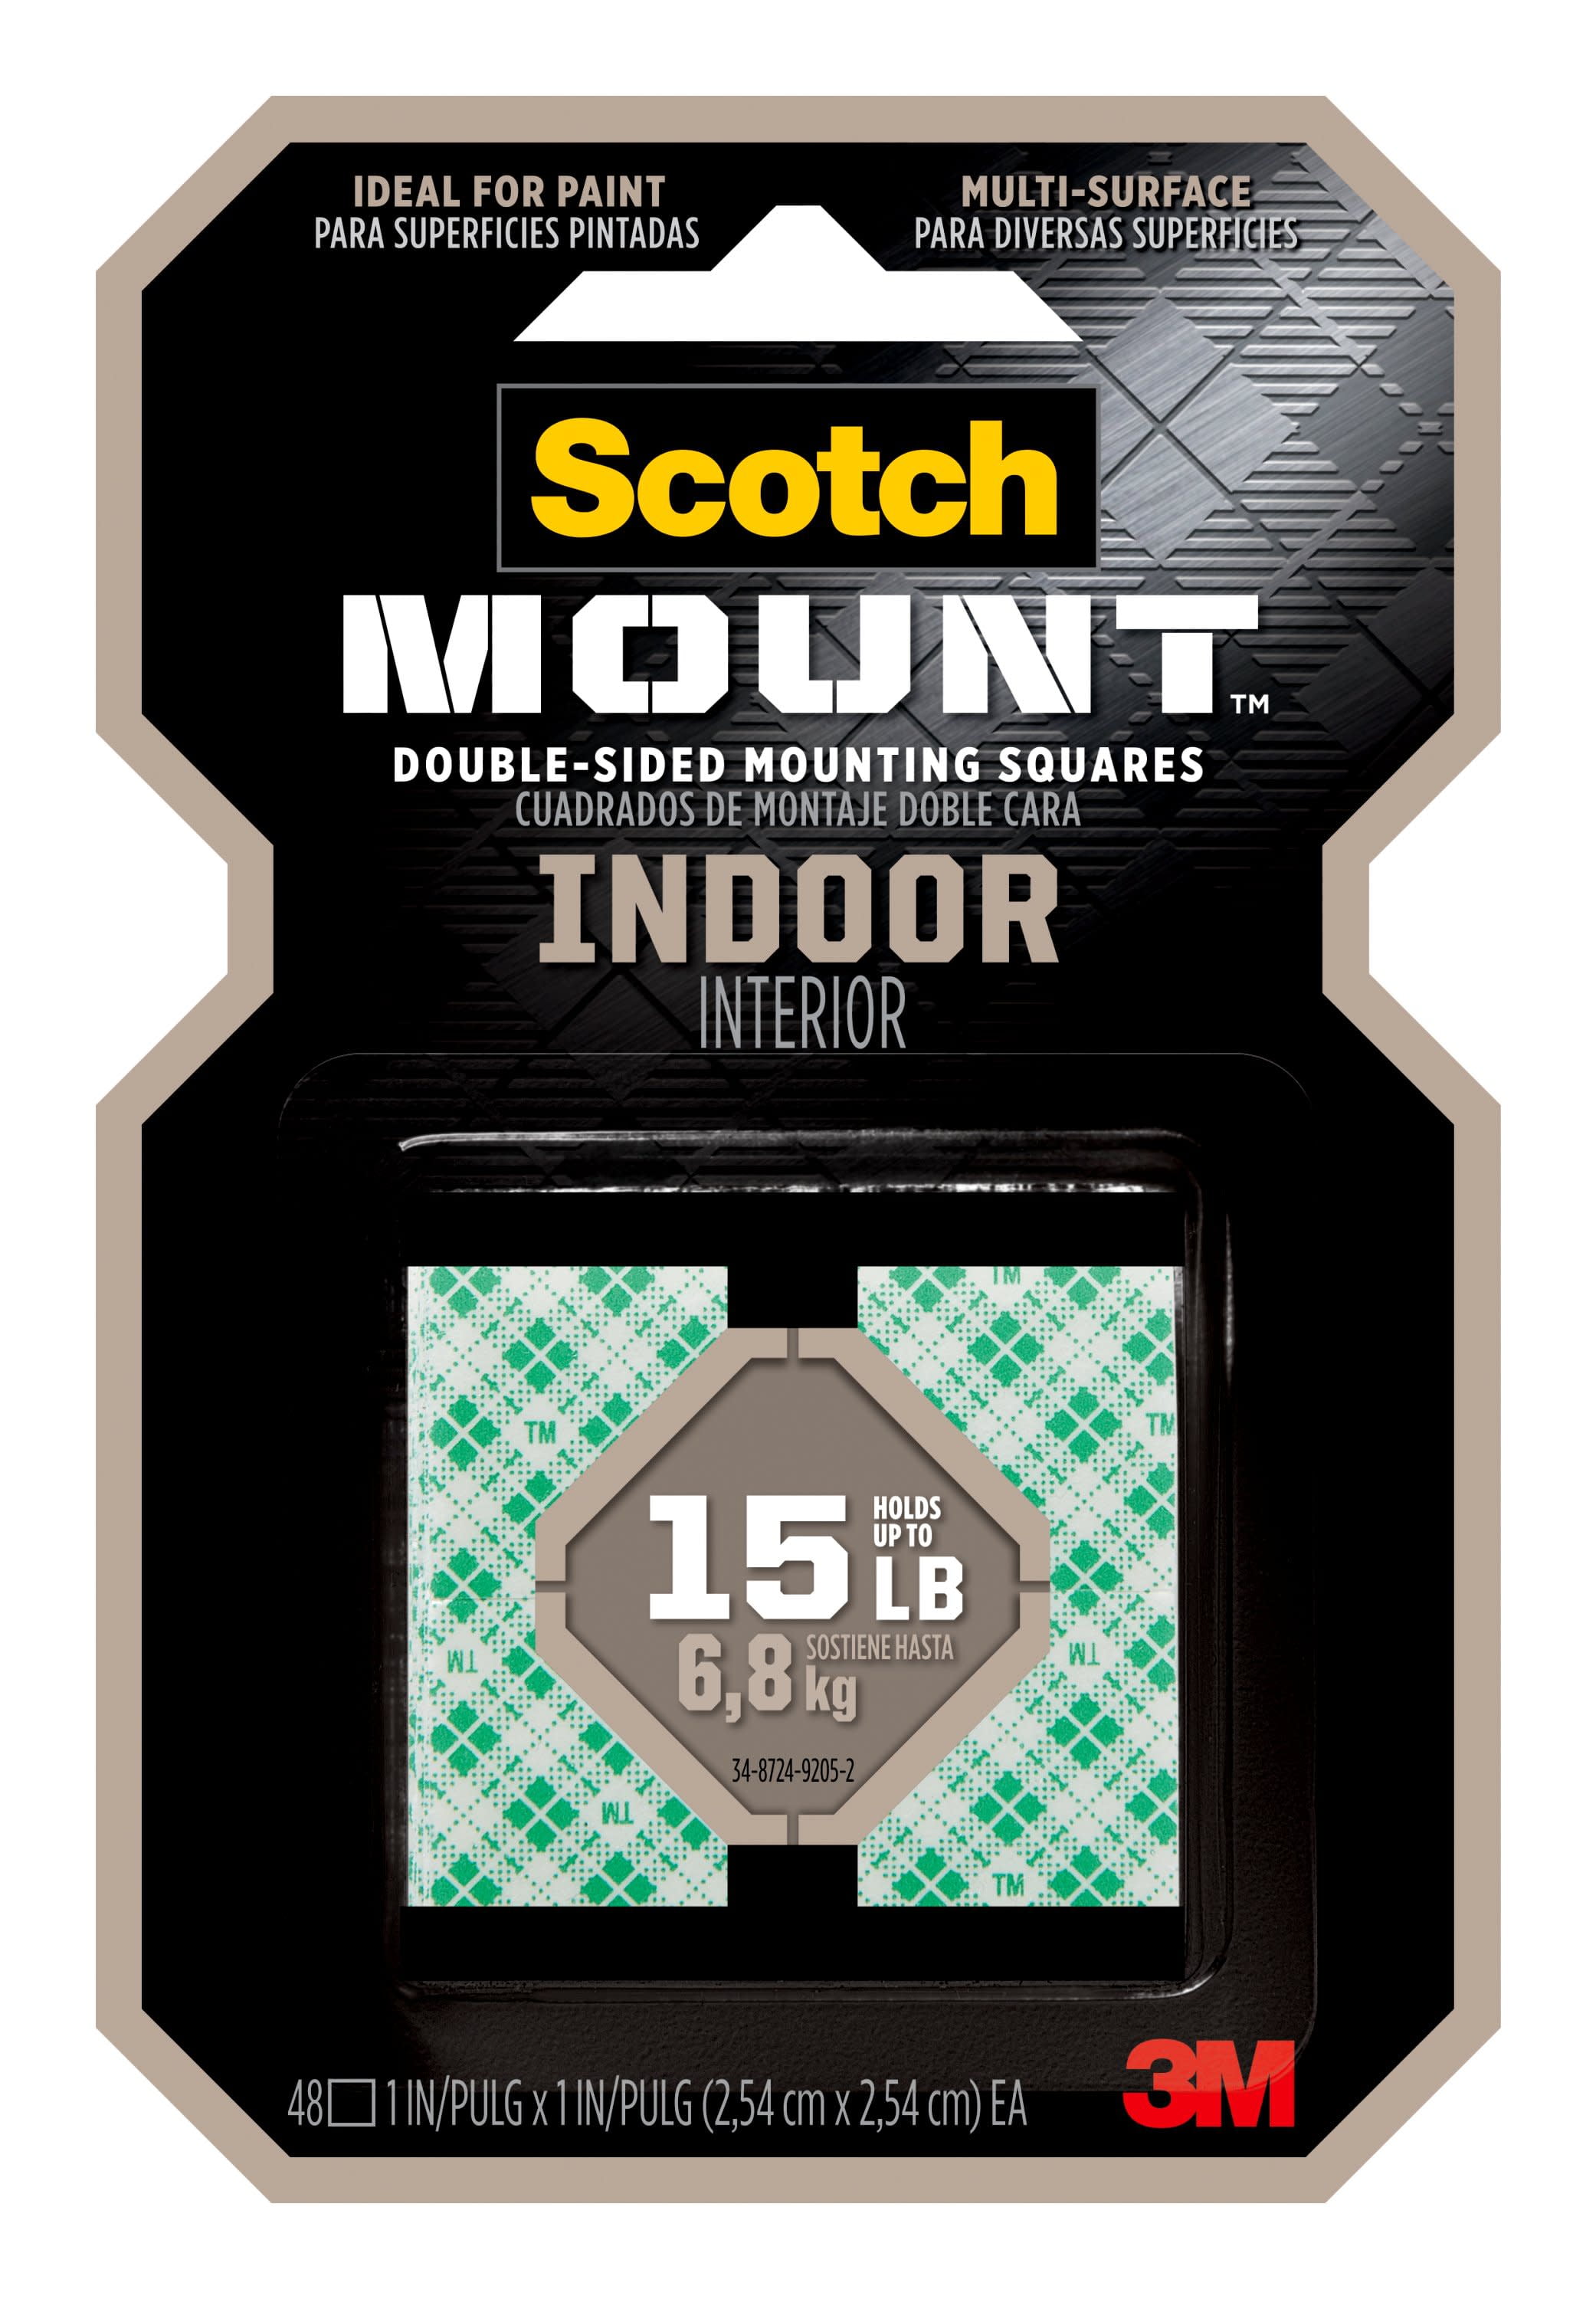 48 Squares 1 Scotch Indoor Mounting Tape 1x1 inch Holds up to 6 pounds